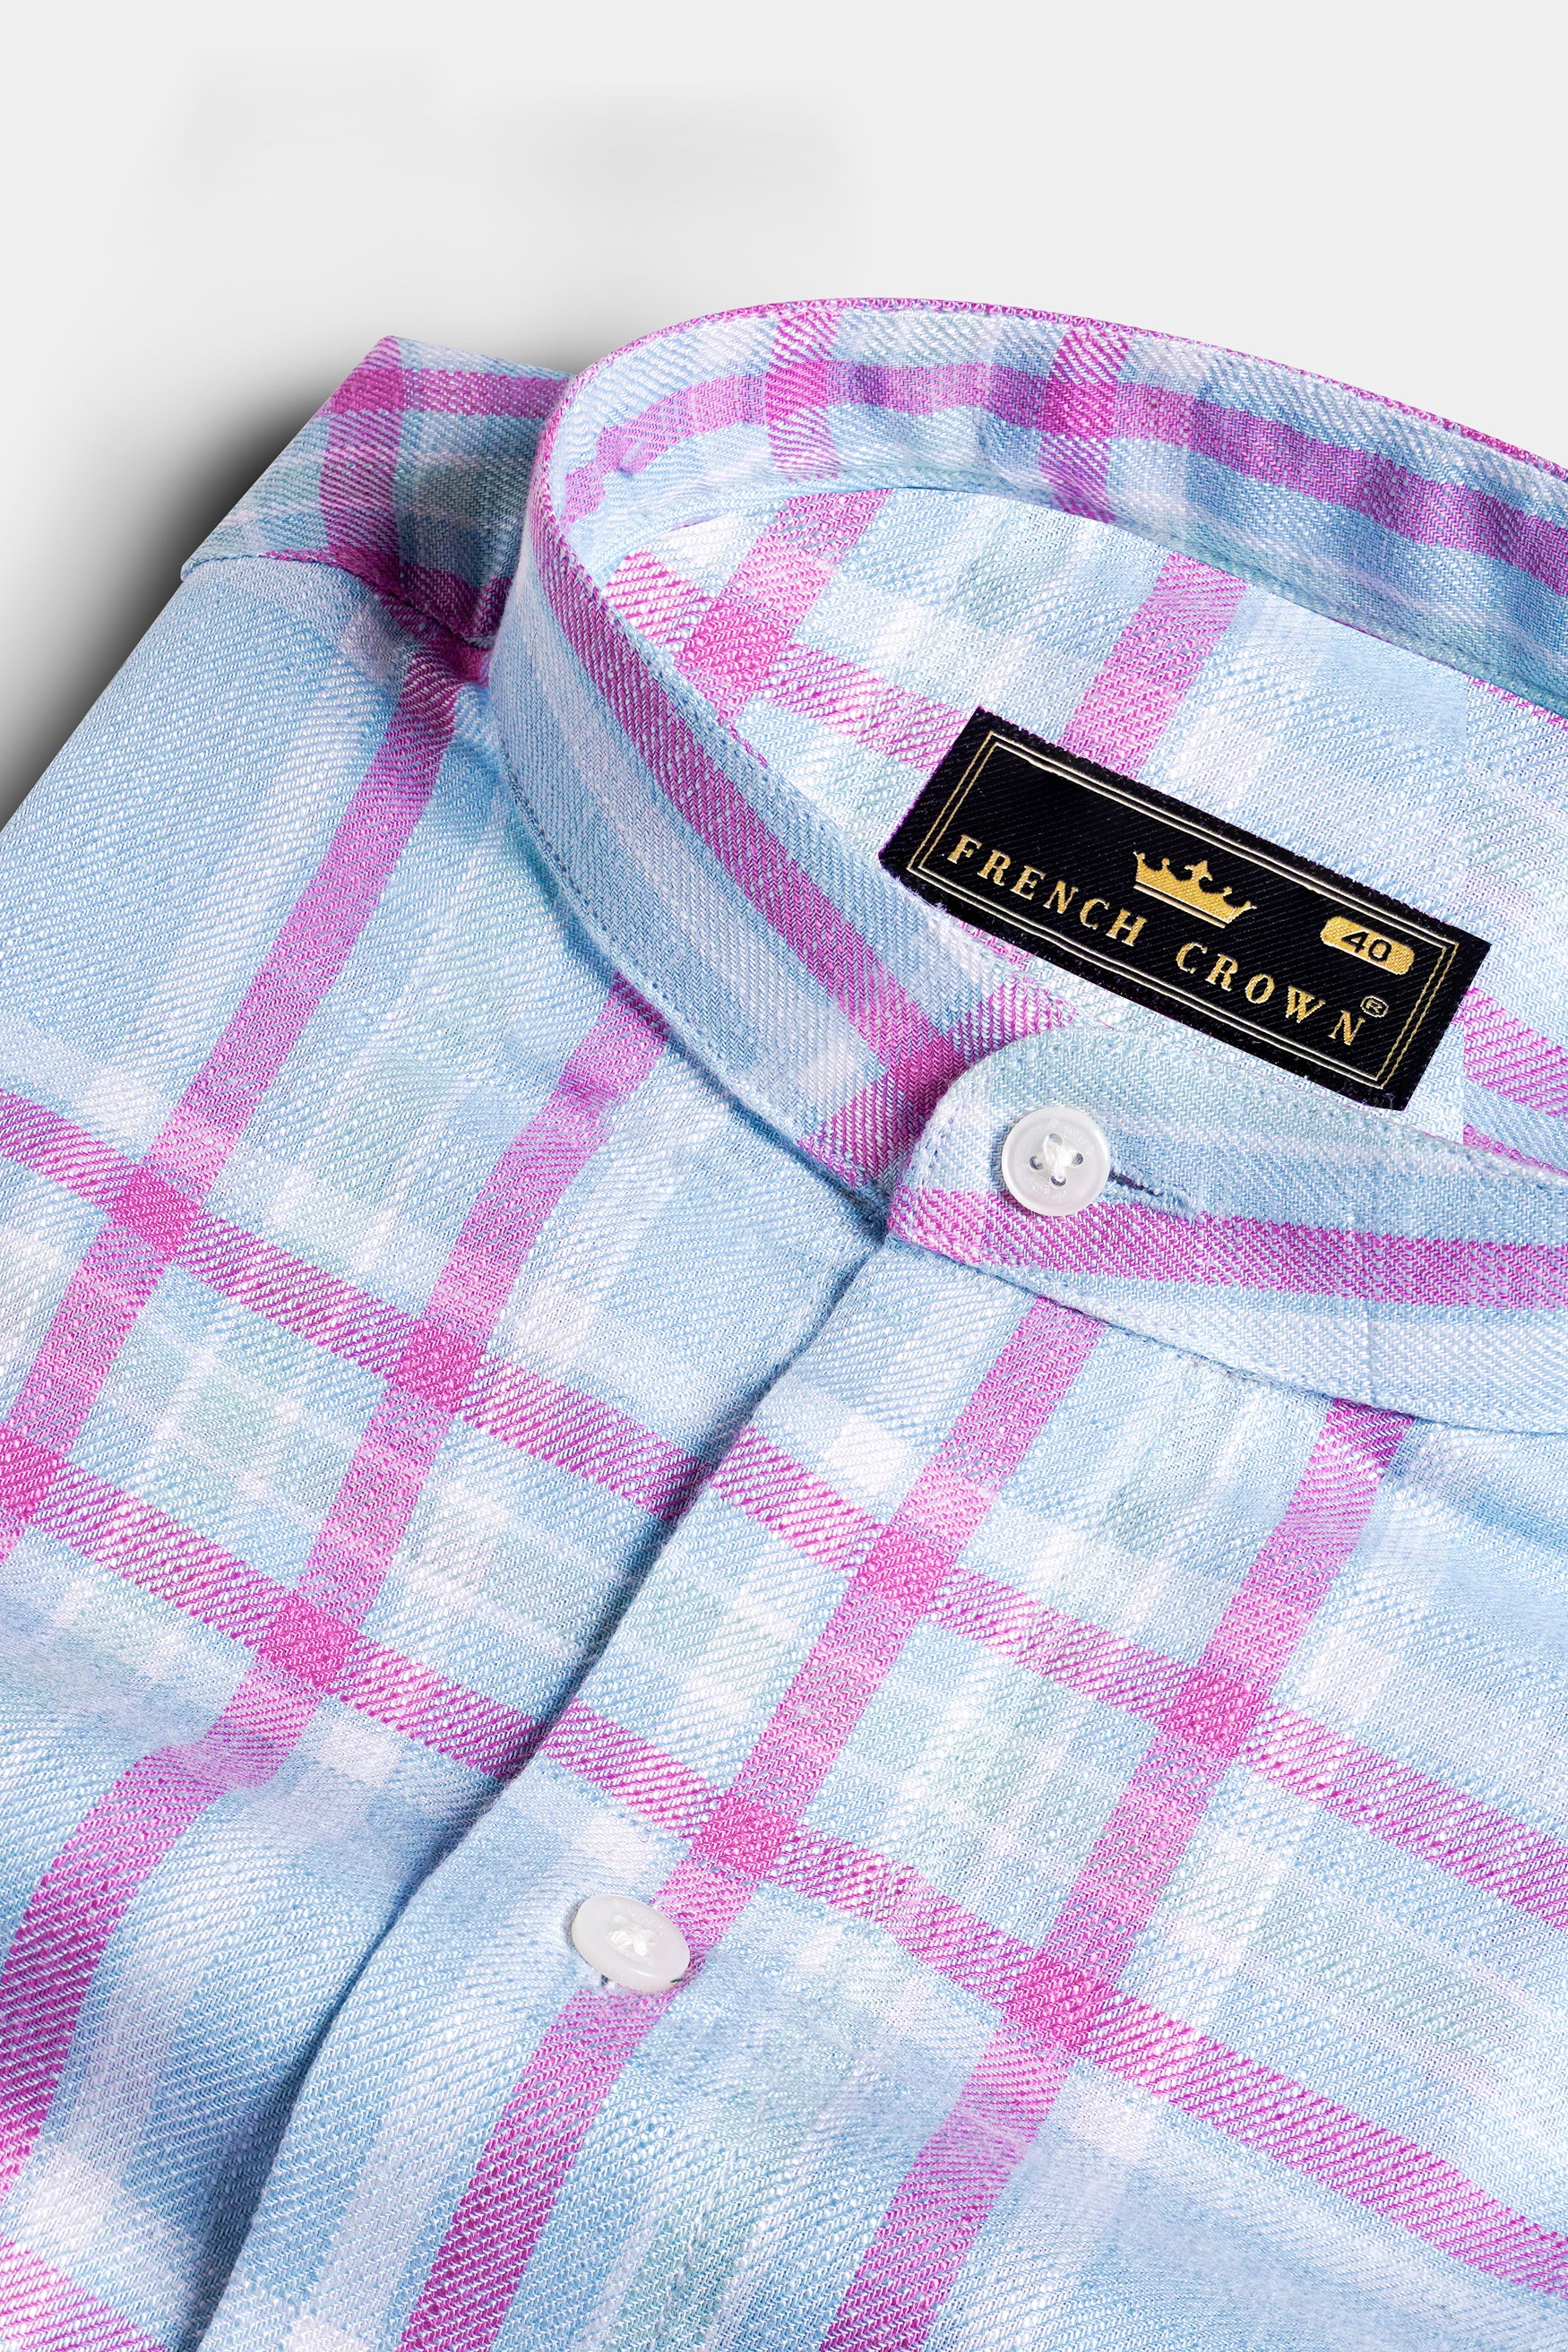 Spindle Blue and Fuchsia Pink Twill Plaid Premium Cotton Shirt 11699-M-38, 11699-M-H-38, 11699-M-39, 11699-M-H-39, 11699-M-40, 11699-M-H-40, 11699-M-42, 11699-M-H-42, 11699-M-44, 11699-M-H-44, 11699-M-46, 11699-M-H-46, 11699-M-48, 11699-M-H-48, 11699-M-50, 11699-M-H-50, 11699-M-52, 11699-M-H-52